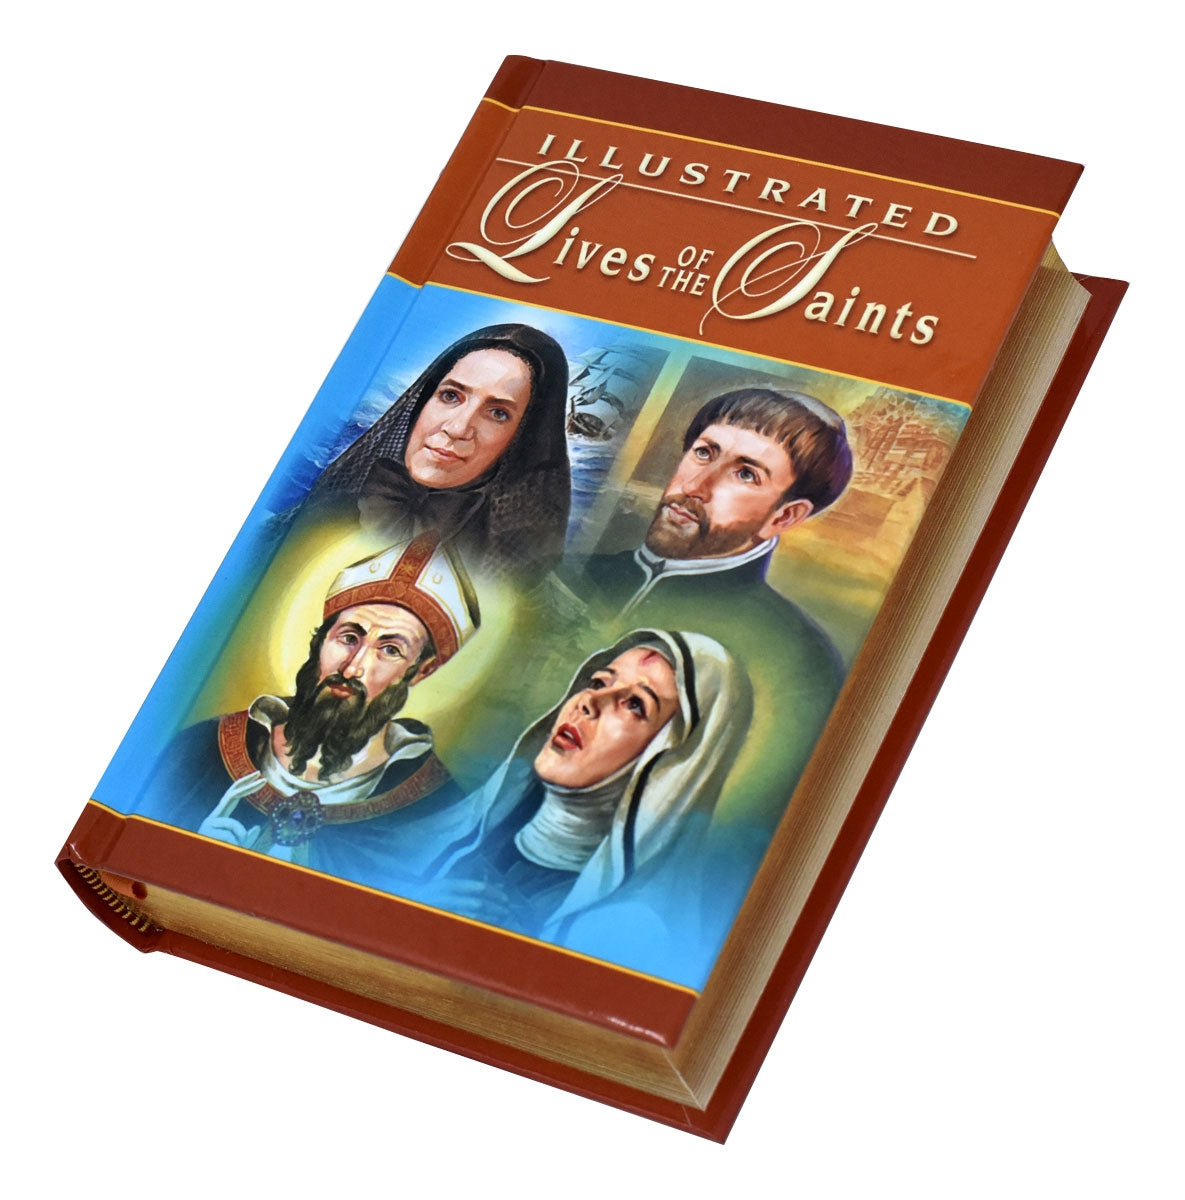 Illustrated Lives of the Saints Vol 1 & 2